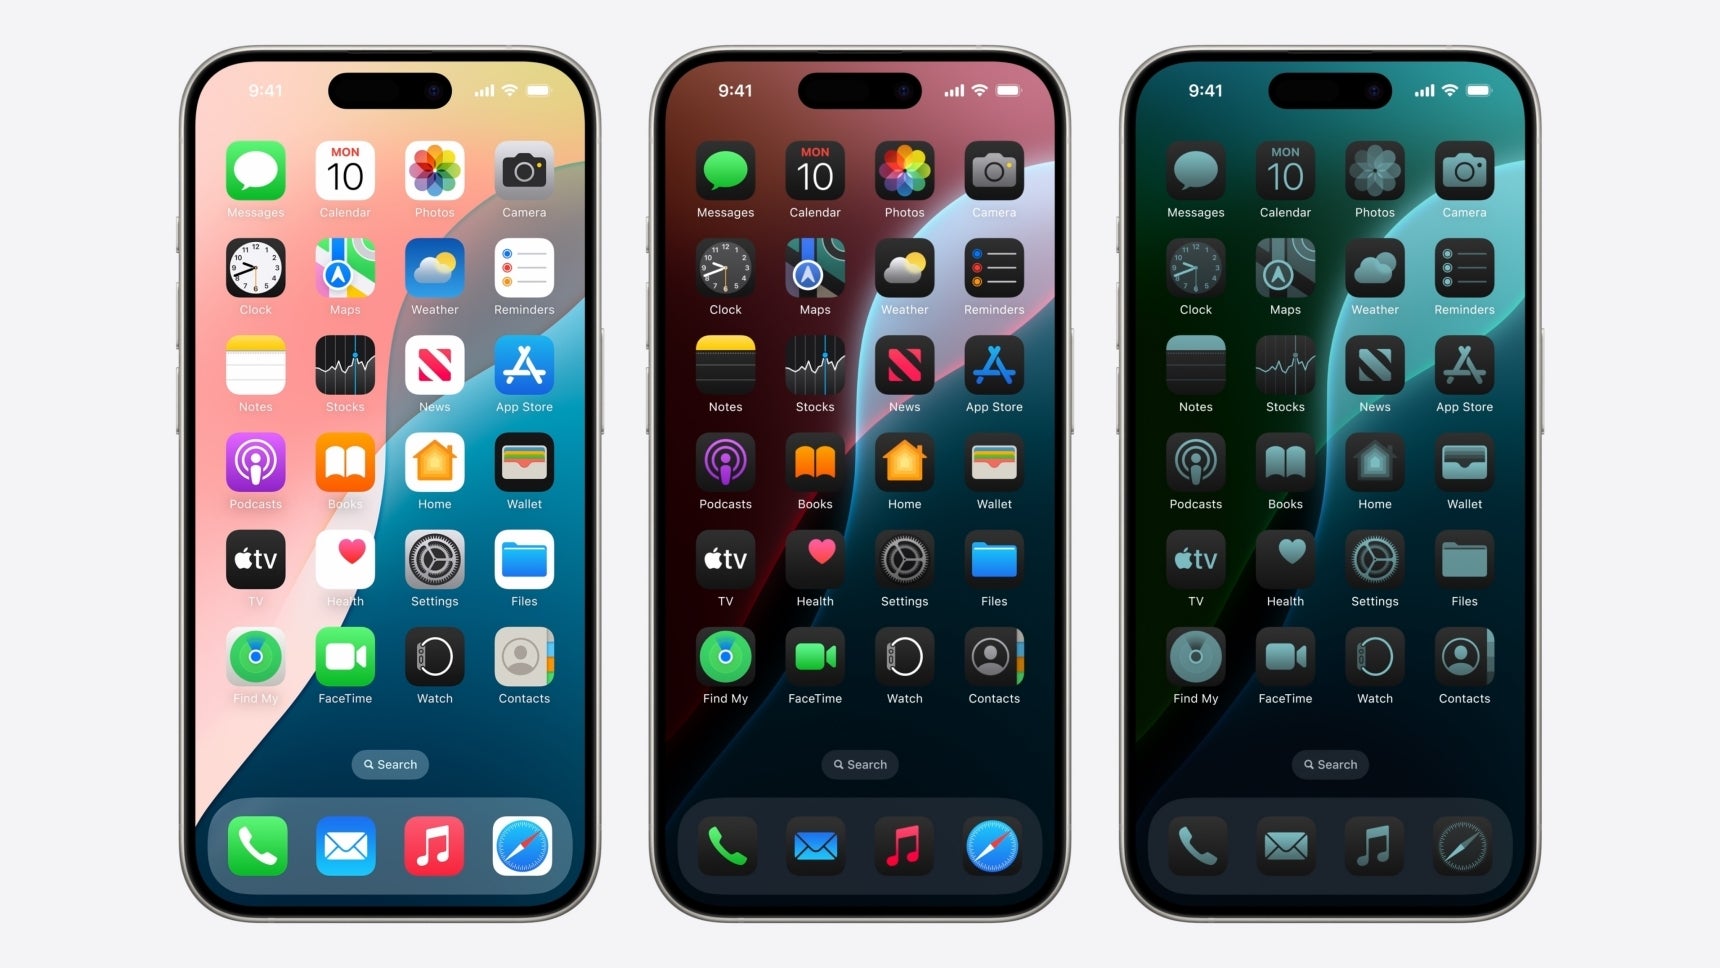 iOS 18’s home screen customization options can make your home screen look cartoonish and hard to read. On the bright side, you don’t have to use them if you don’t want to. - iOS 18 turned my iPhone into a bad Android phone; proves why Apple refused to make the iPhone &quot;fun&quot;